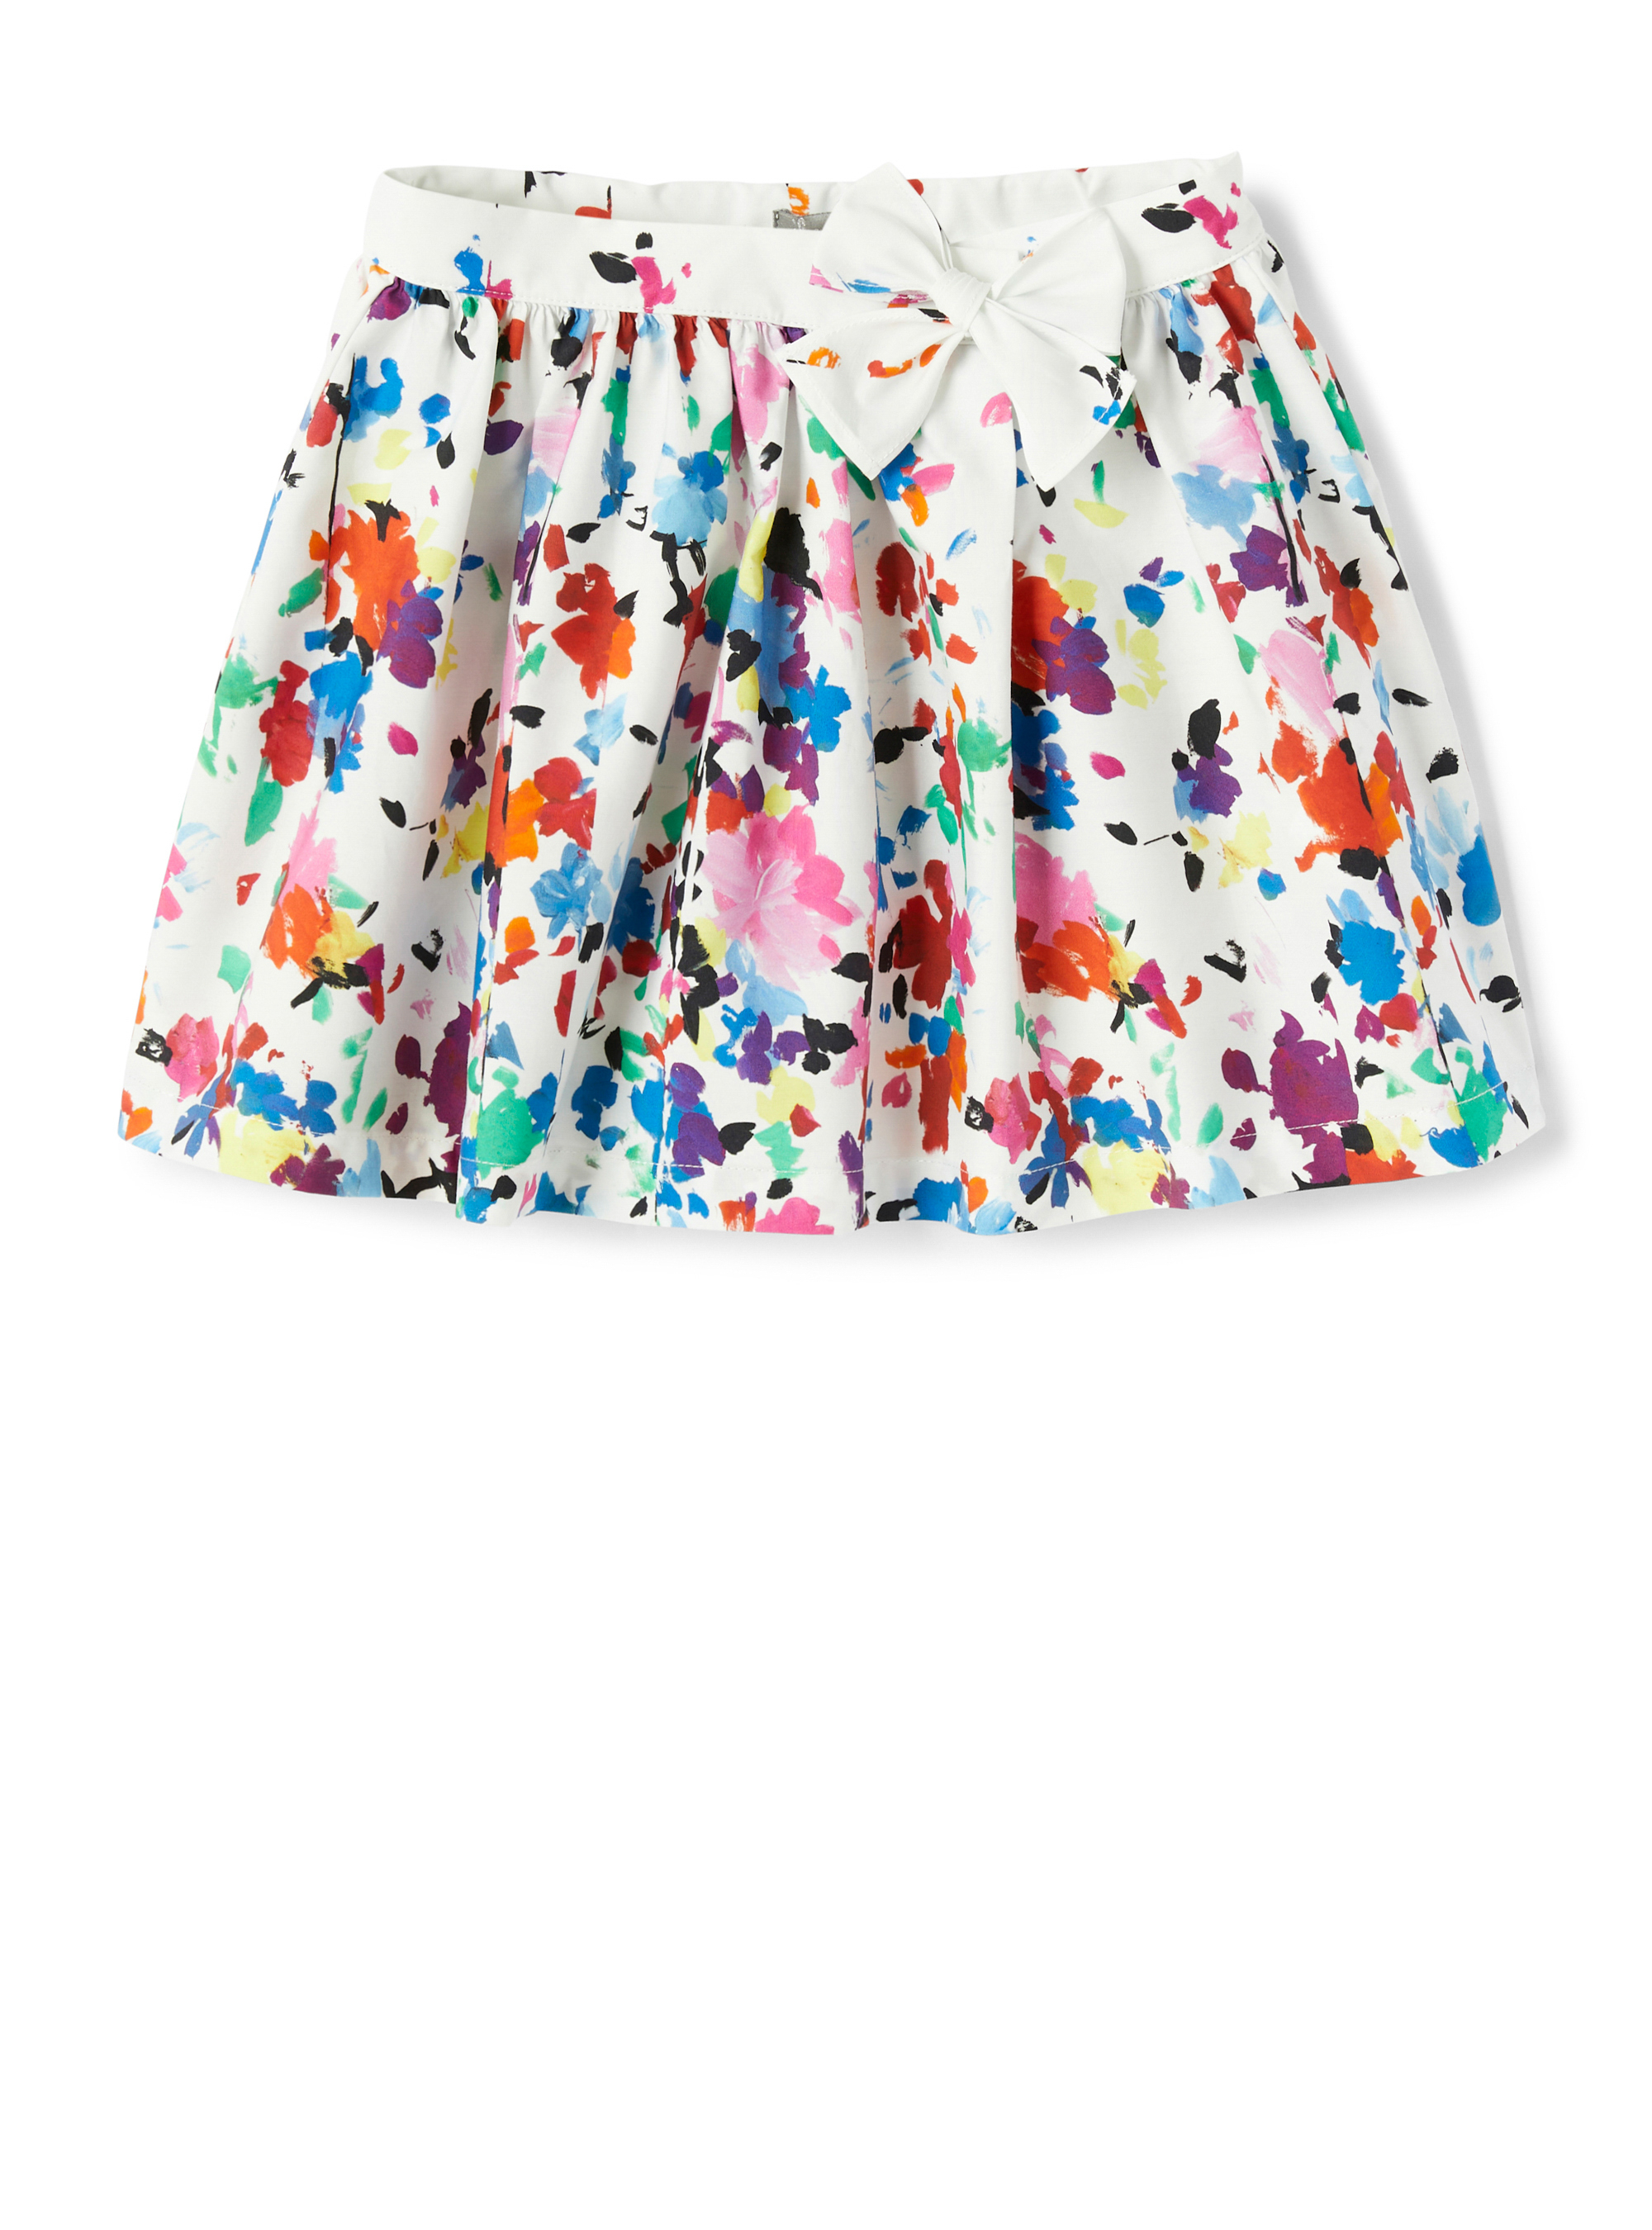 Circle skirt with abstract flowers - Multicolor | Il Gufo